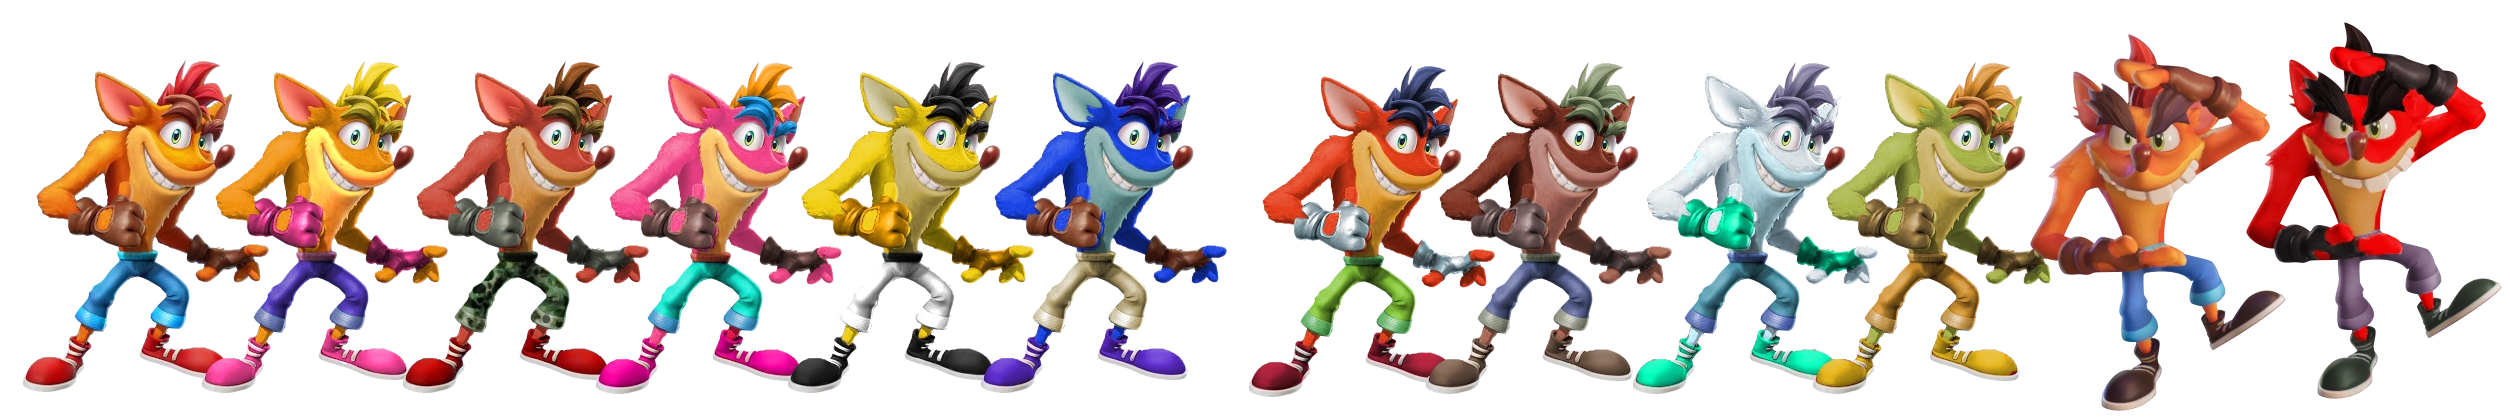 All the Crash Bandicoot content we could see in Super Smash Bros